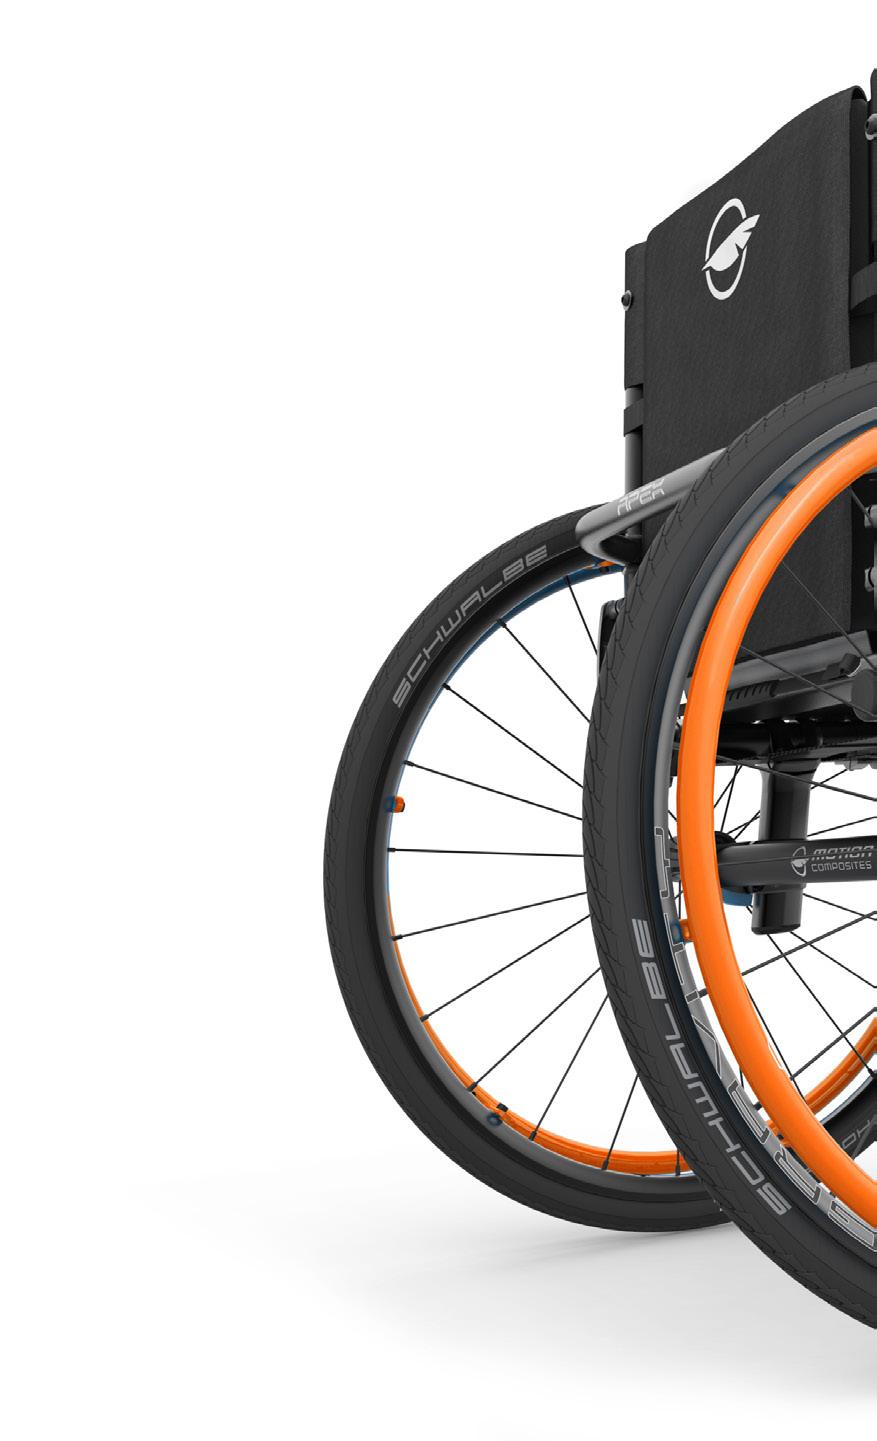 Always keep your edge Our ultralight, fully adjustable rigid wheelchair represents a revolution in rigid chair design. Why? Because it s the best of all possible worlds.